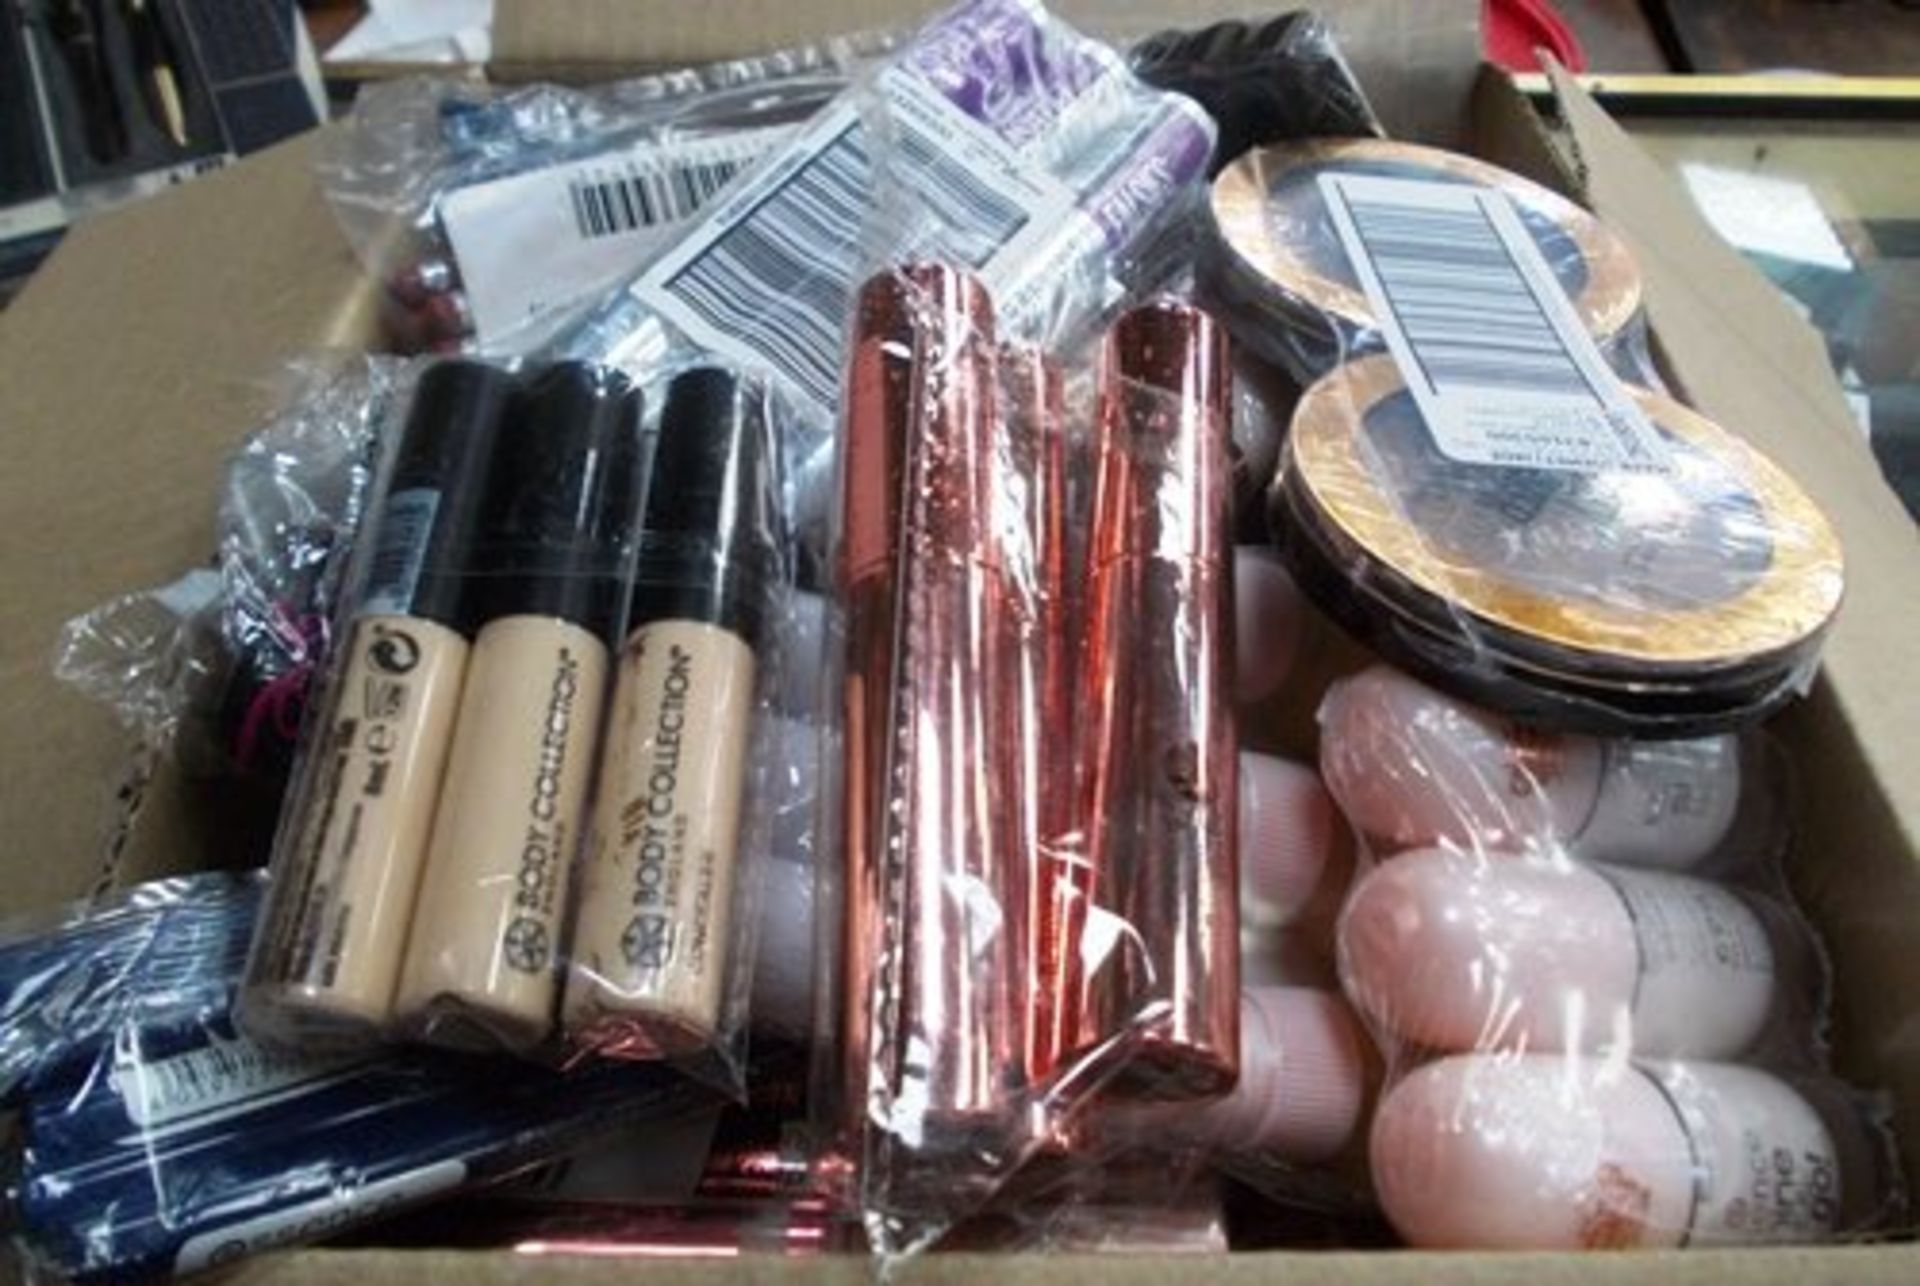 100 x various Essence Cosmetics including mascara, lipstick, foundation etc. - Sealed new in pack (